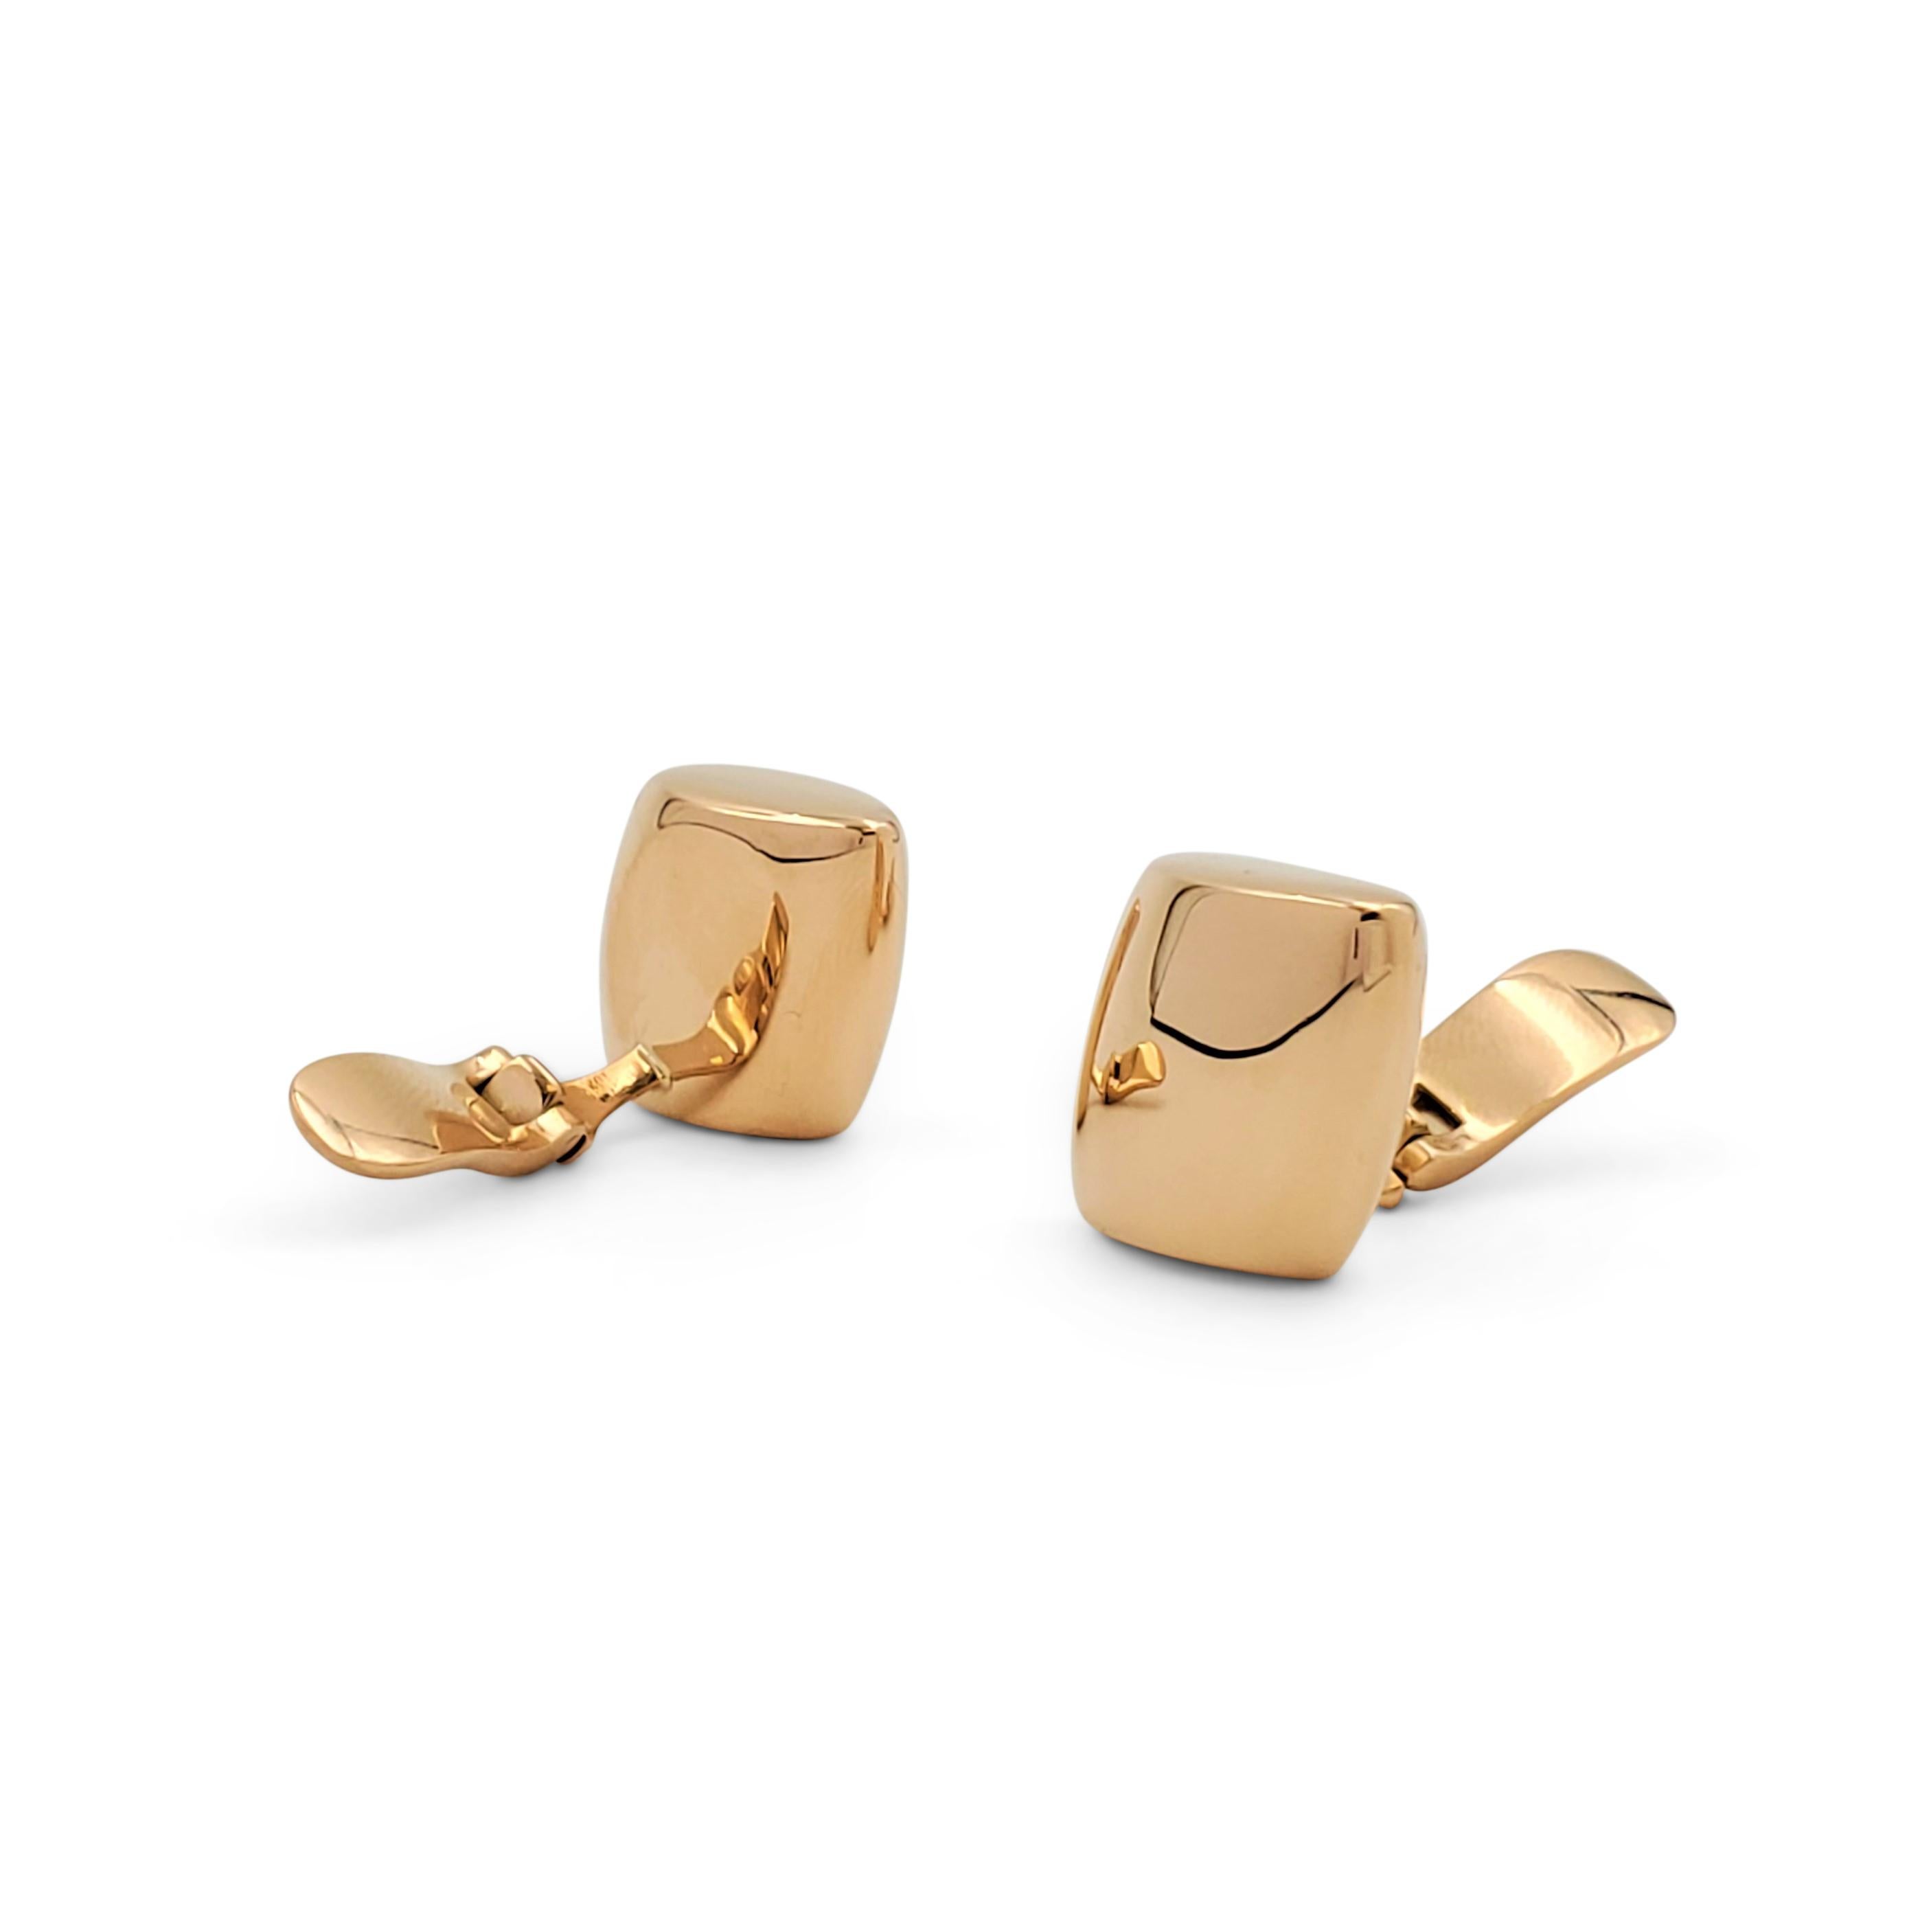 Authentic Vhernier 'Plateau' earrings crafted in 18 karat rose gold. The earrings feature a sleek sculptural curved shape. Clip back without posts. Signed Vhernier, 750, with serial number. The earrings are not presented with the original box or